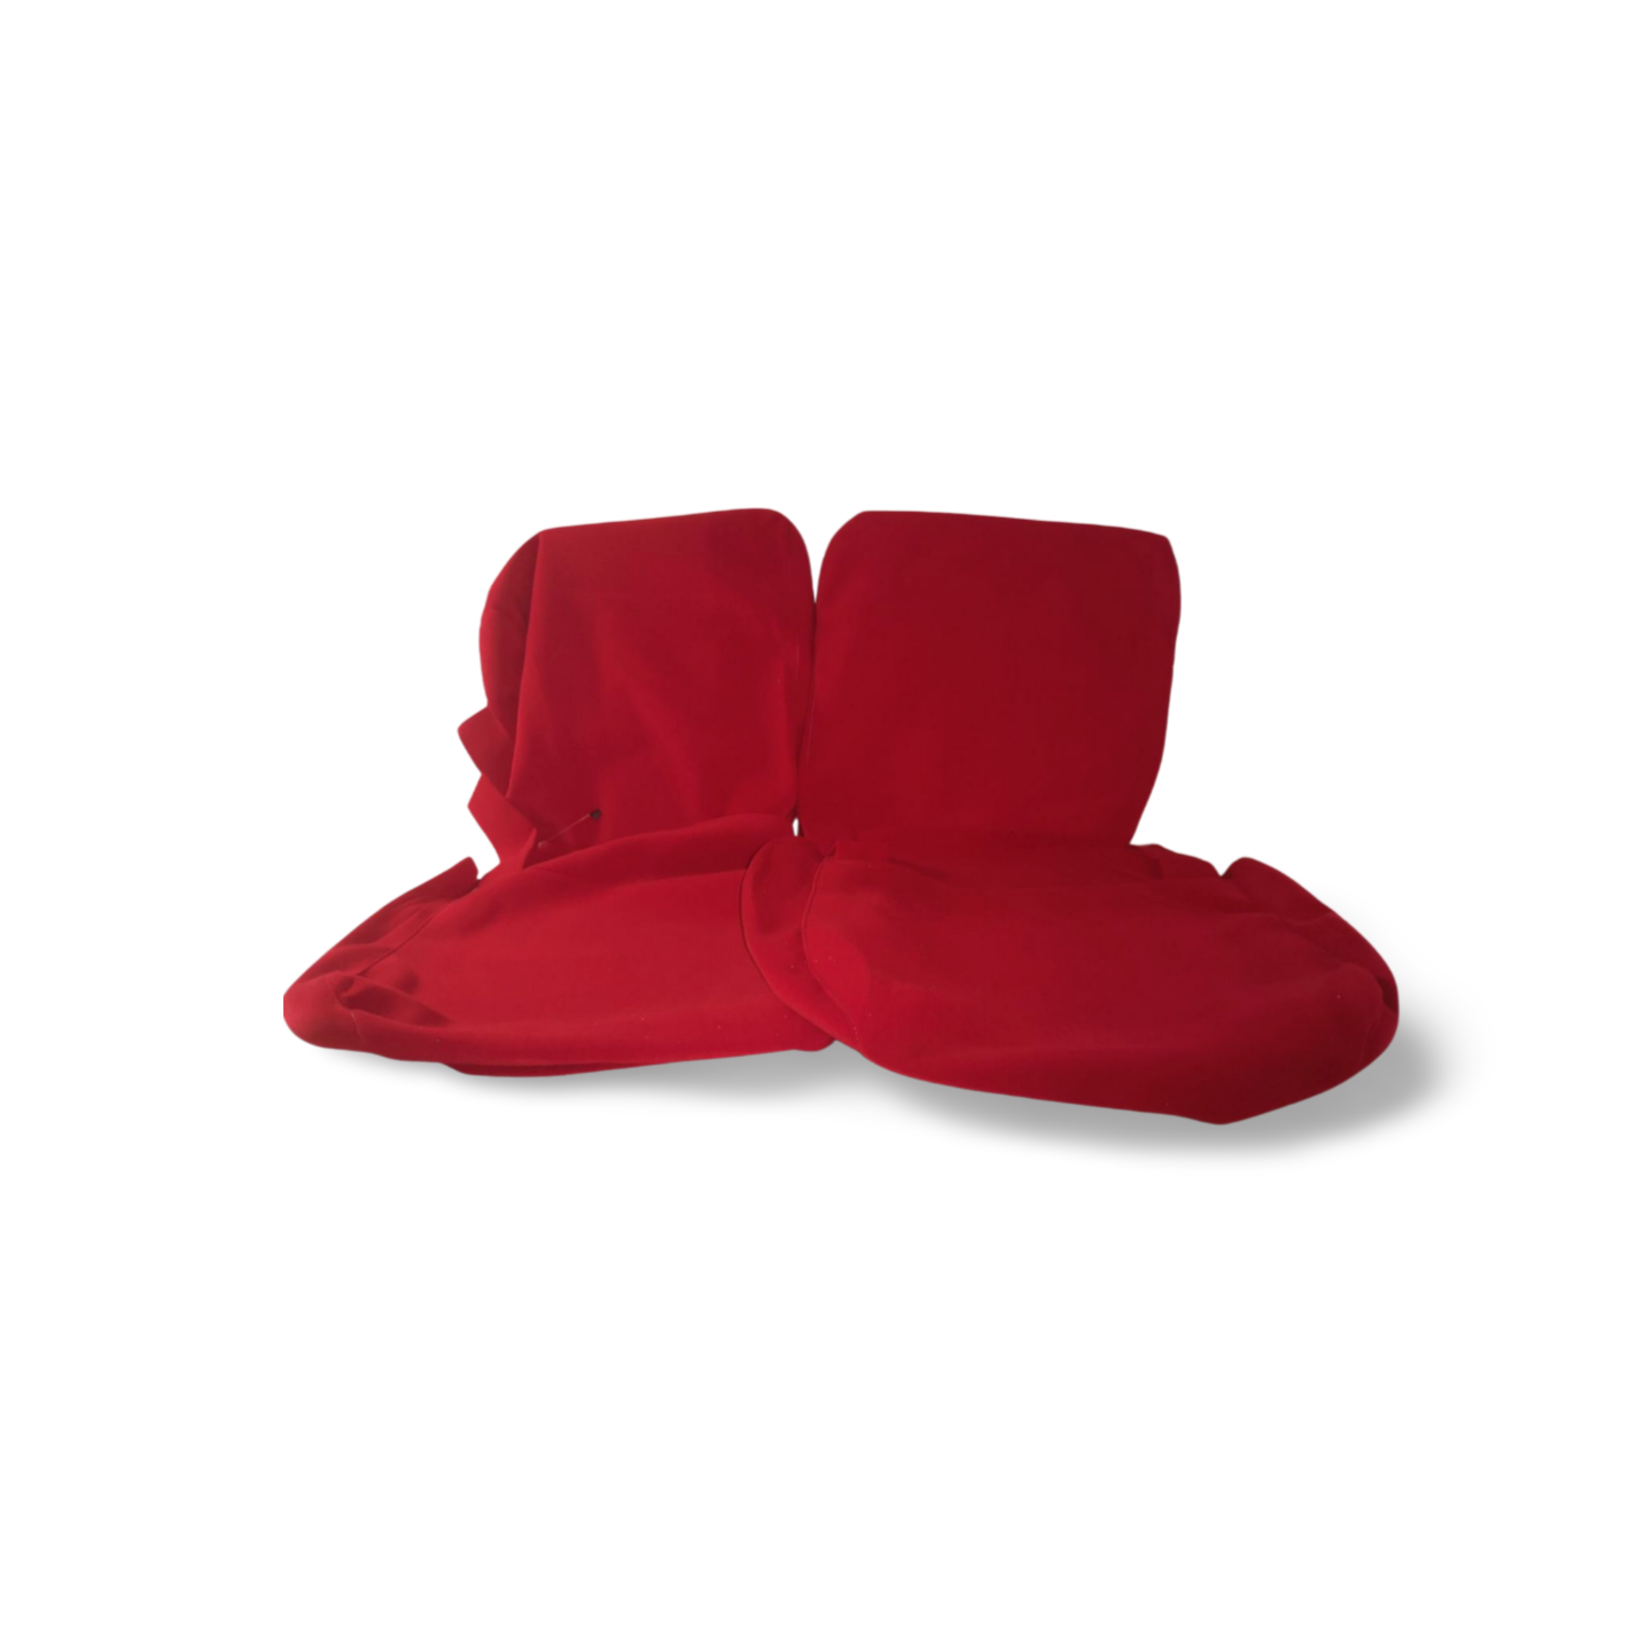 Hoesset Jersey rood 16/73 (met achterbank armsteun 20cm) non Pallas 09/62-07/69 Nr Org: Interior - Image 16/73